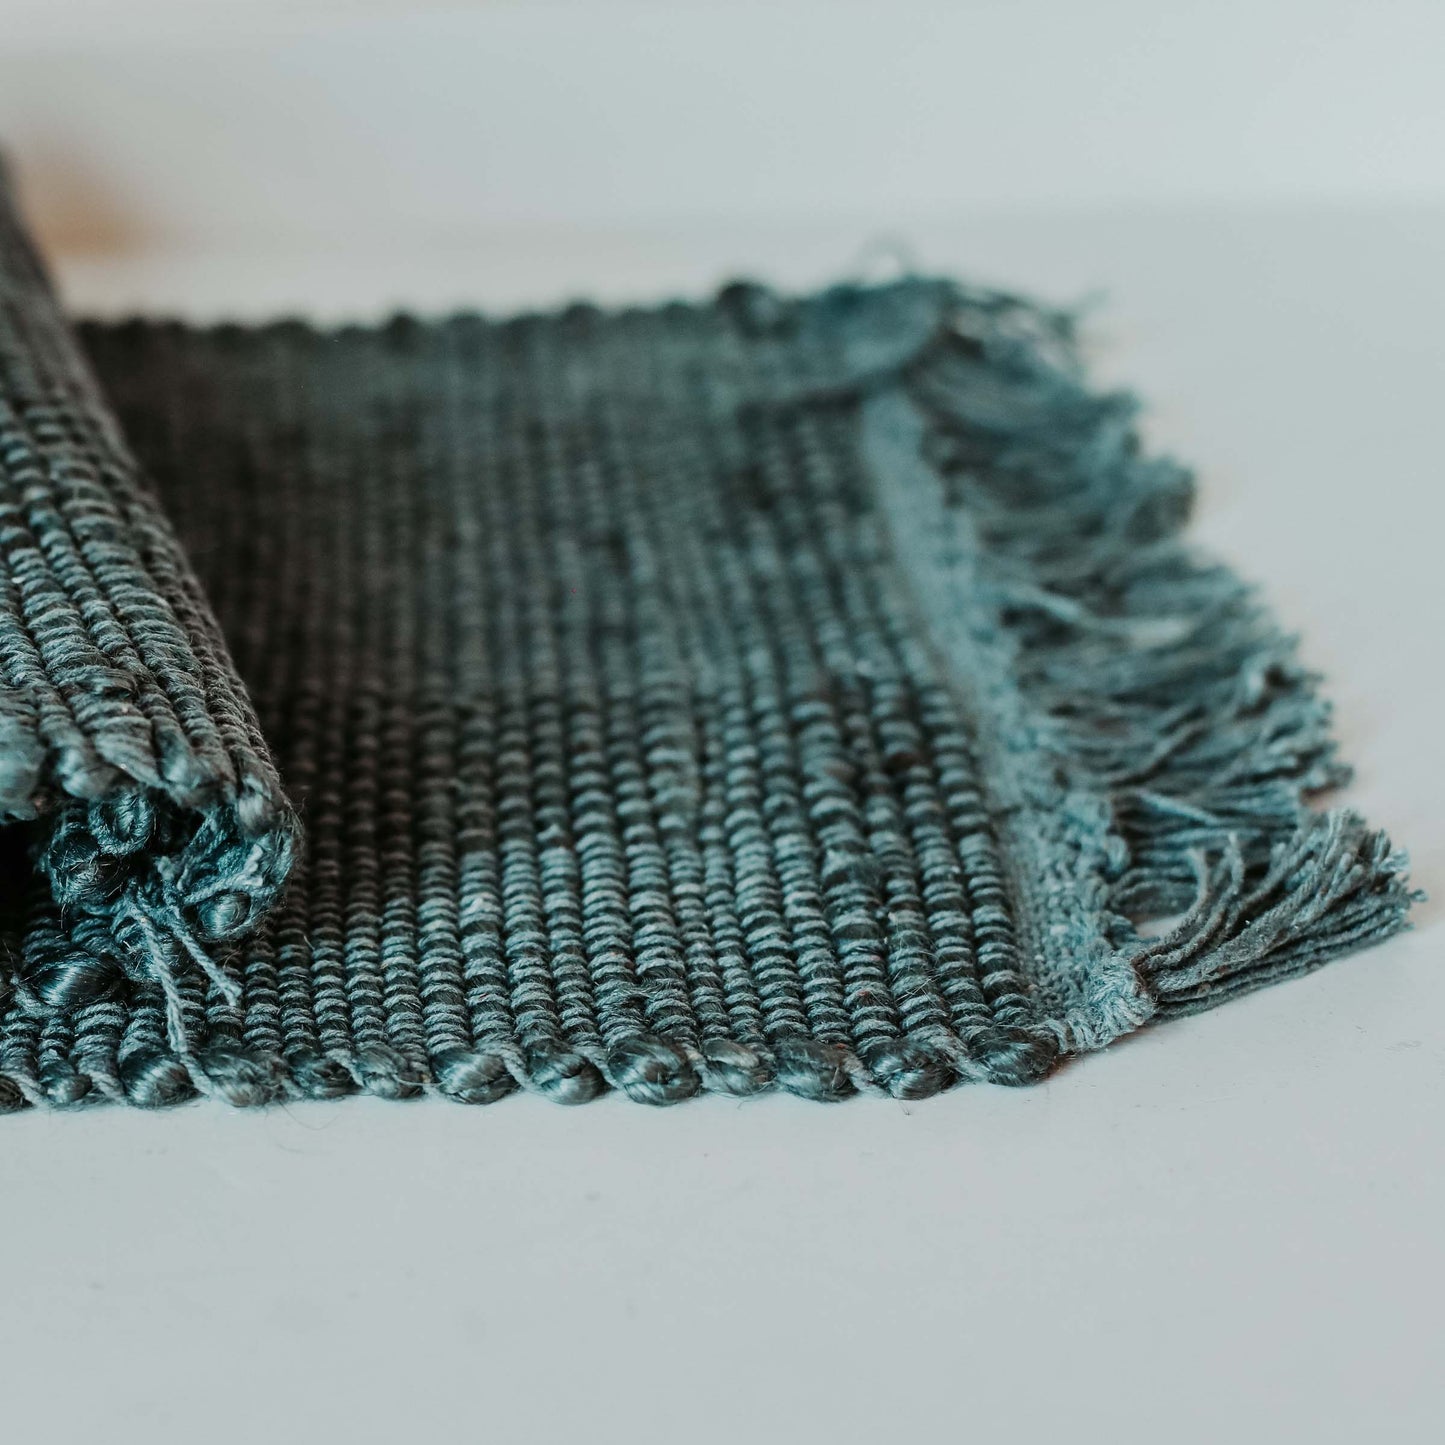 Woven Fringe Placemat